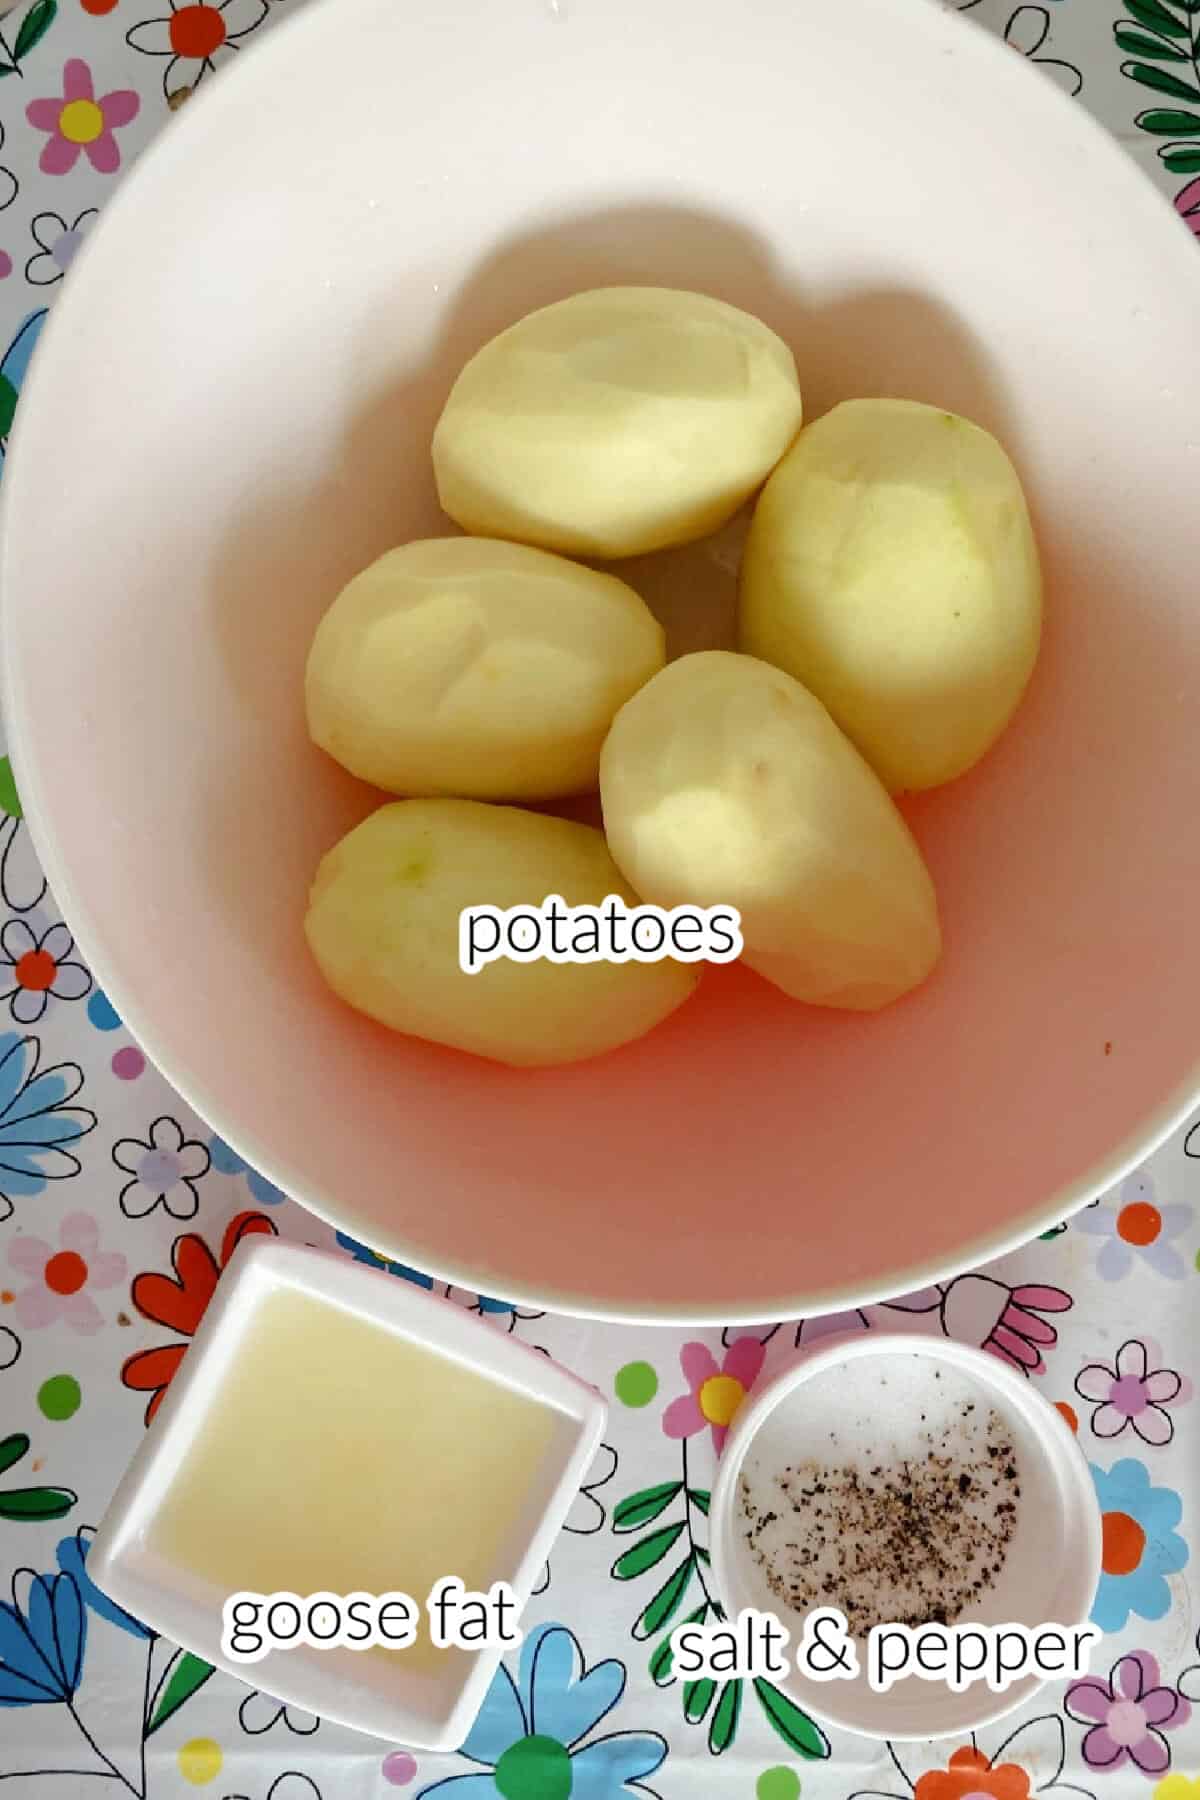 Ingredients needed to make roast potatoes with goose fat.